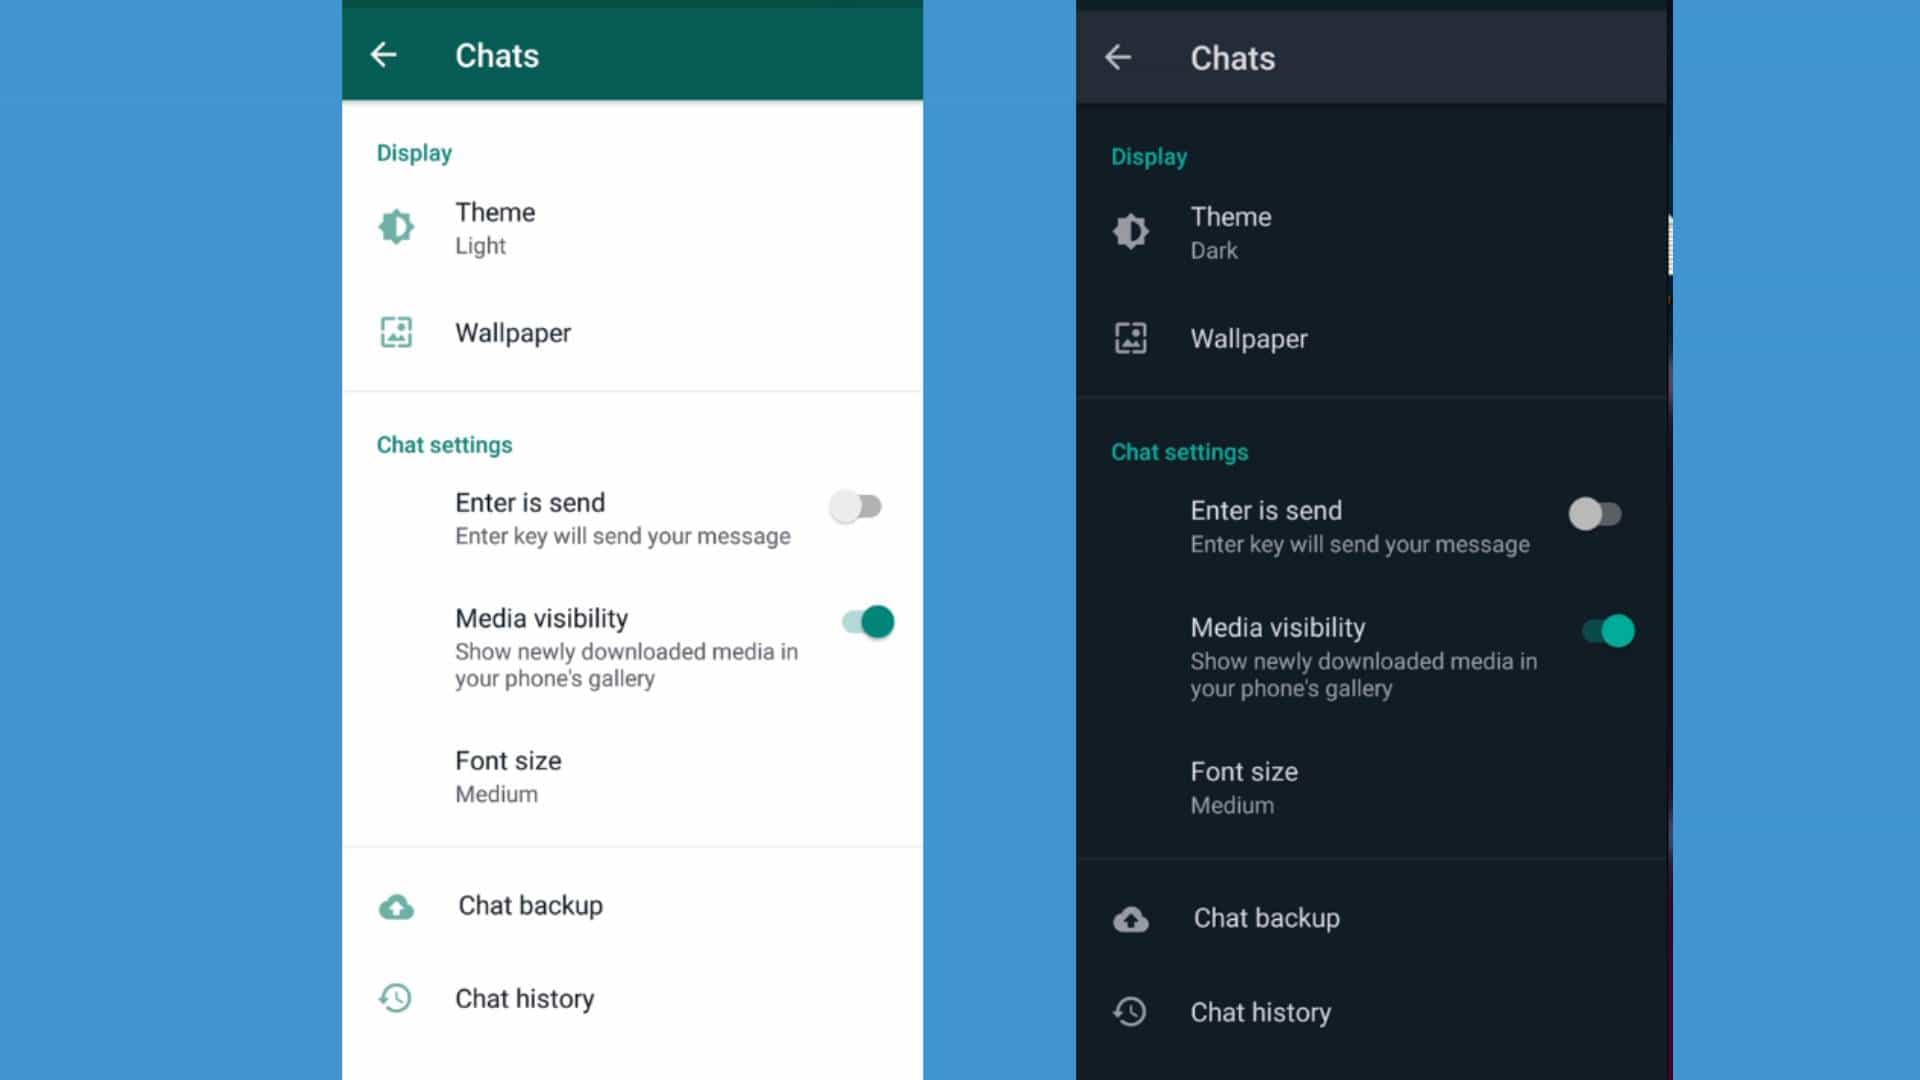 How To Enable Dark Mode On WhatsApp on Android, and iOS